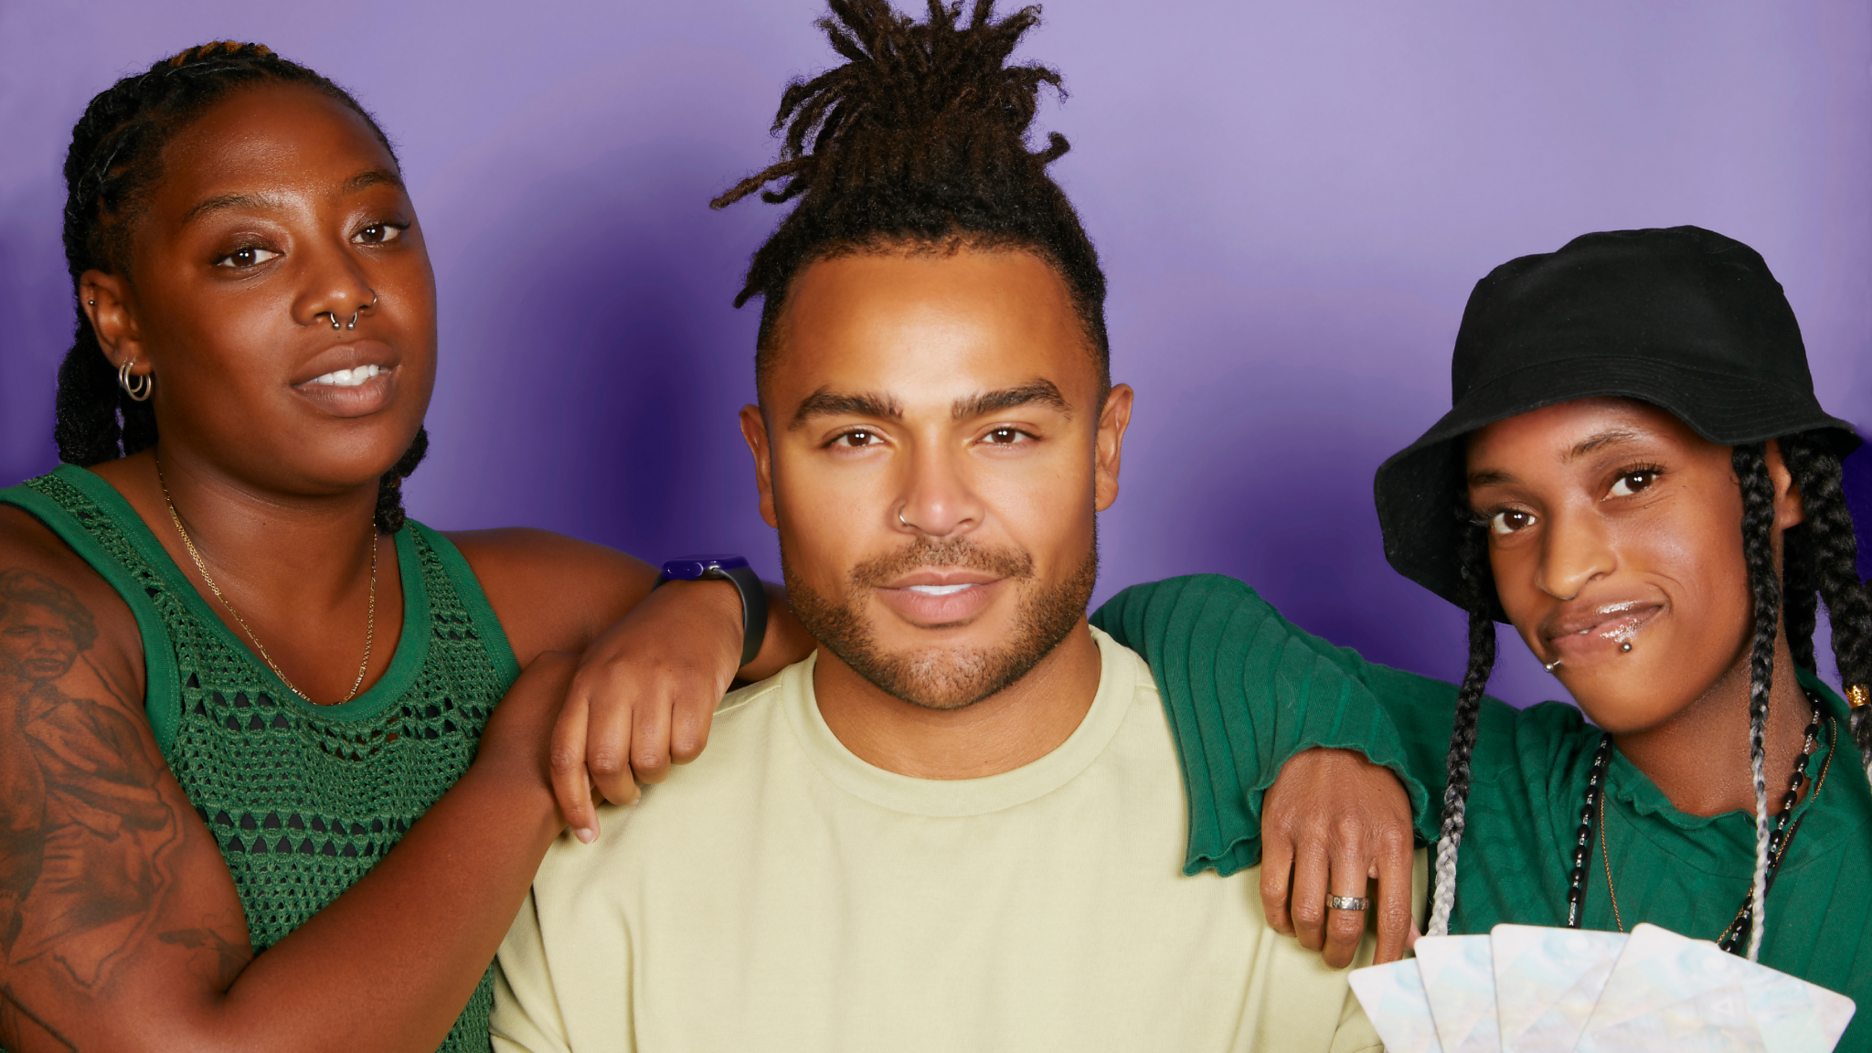 BBC 1Xtra’s first astrology based Black queer dating podcast Swipe Your Sign starts Aug. 19